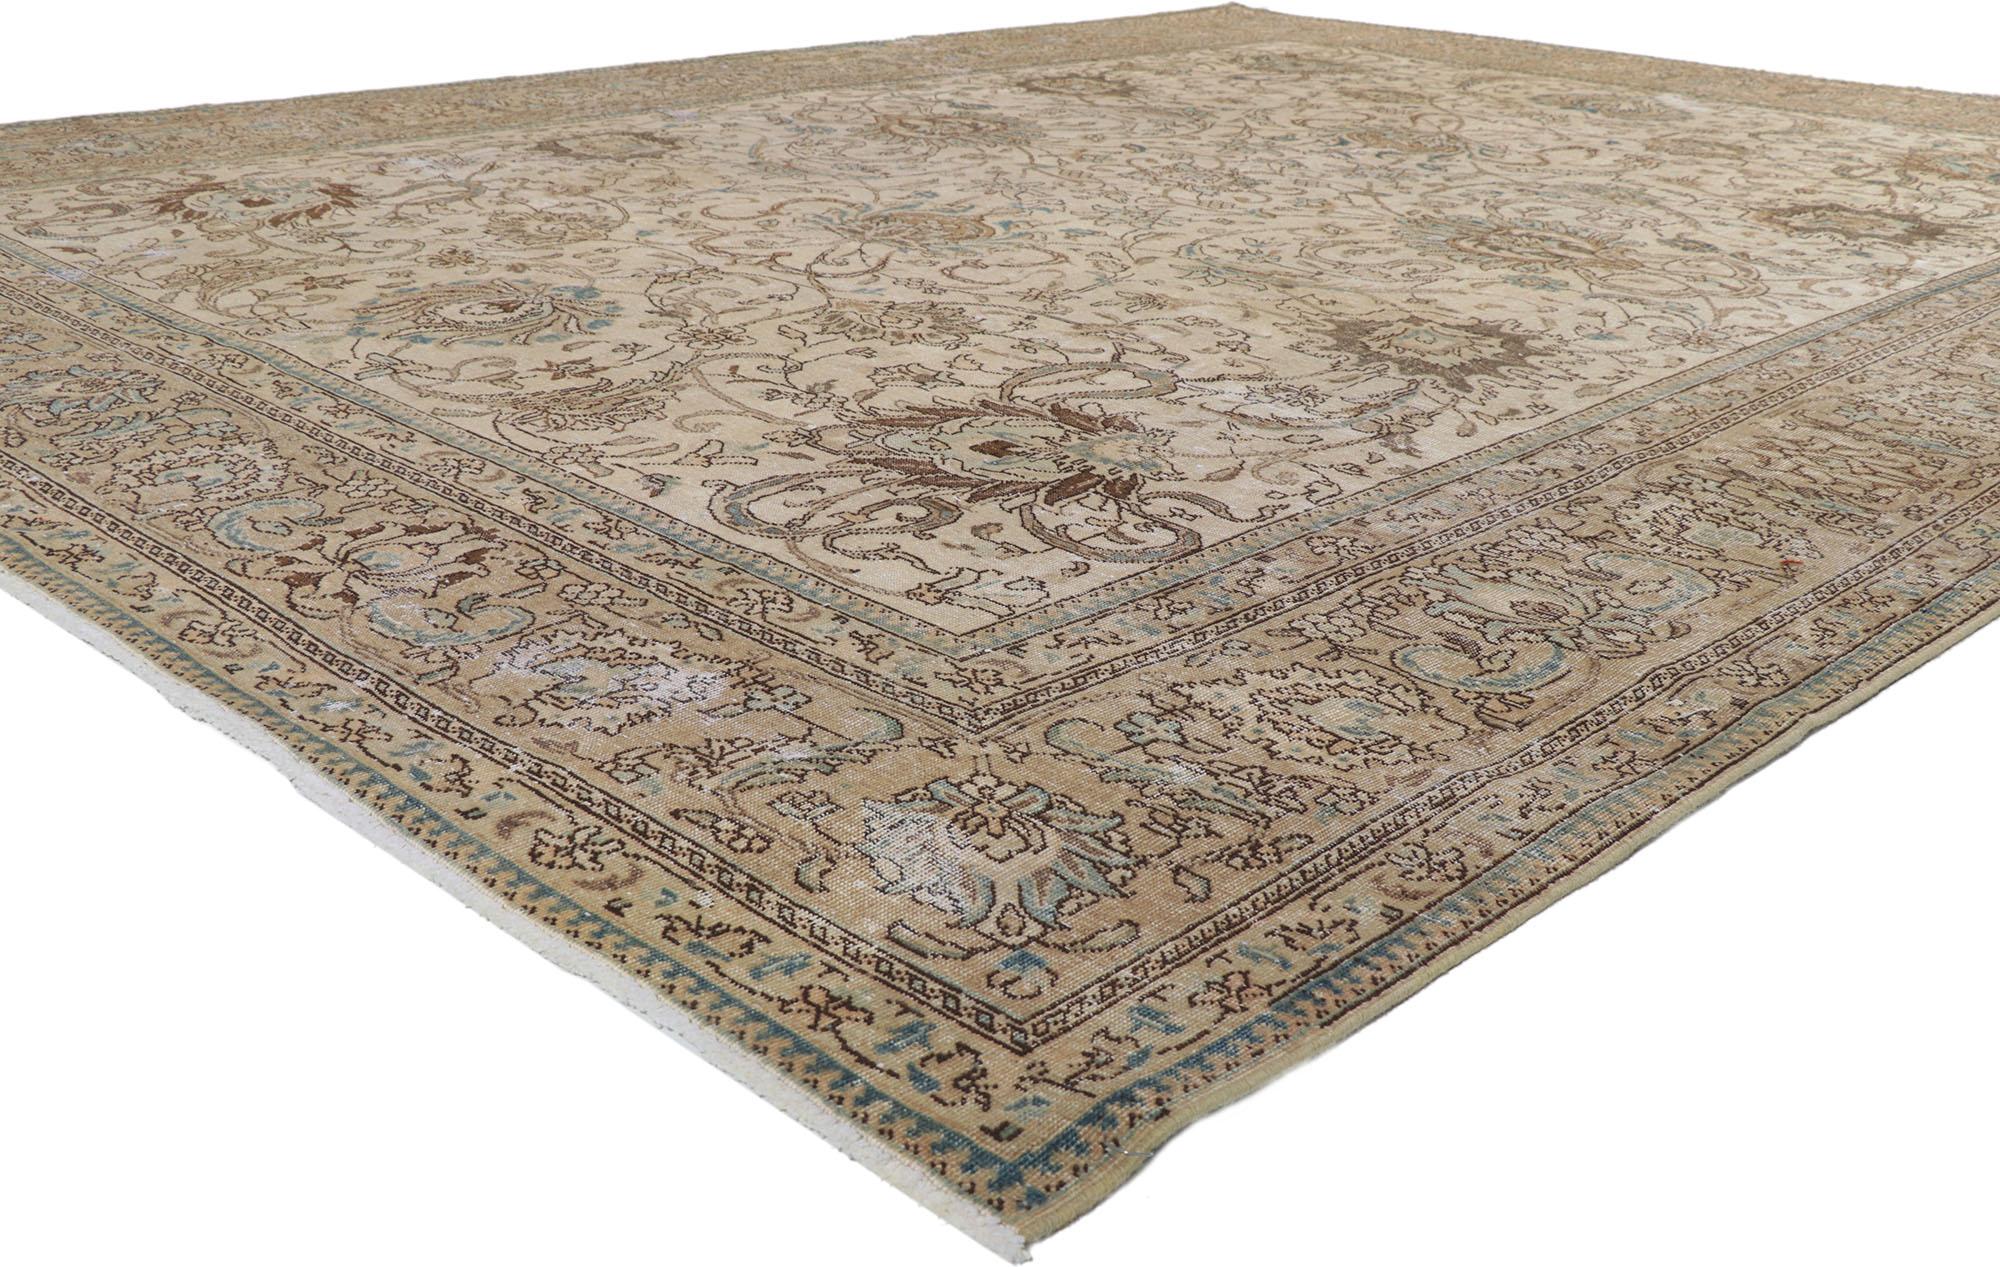 61015 Distressed Vintage Persian Tabriz Rug 09'11 x 12'09. With its effortless beauty and lovingly time-worn composition, this hand-knotted wool distressed vintage Persian Tabriz rug will take on a curated lived-in look that feels timeless while